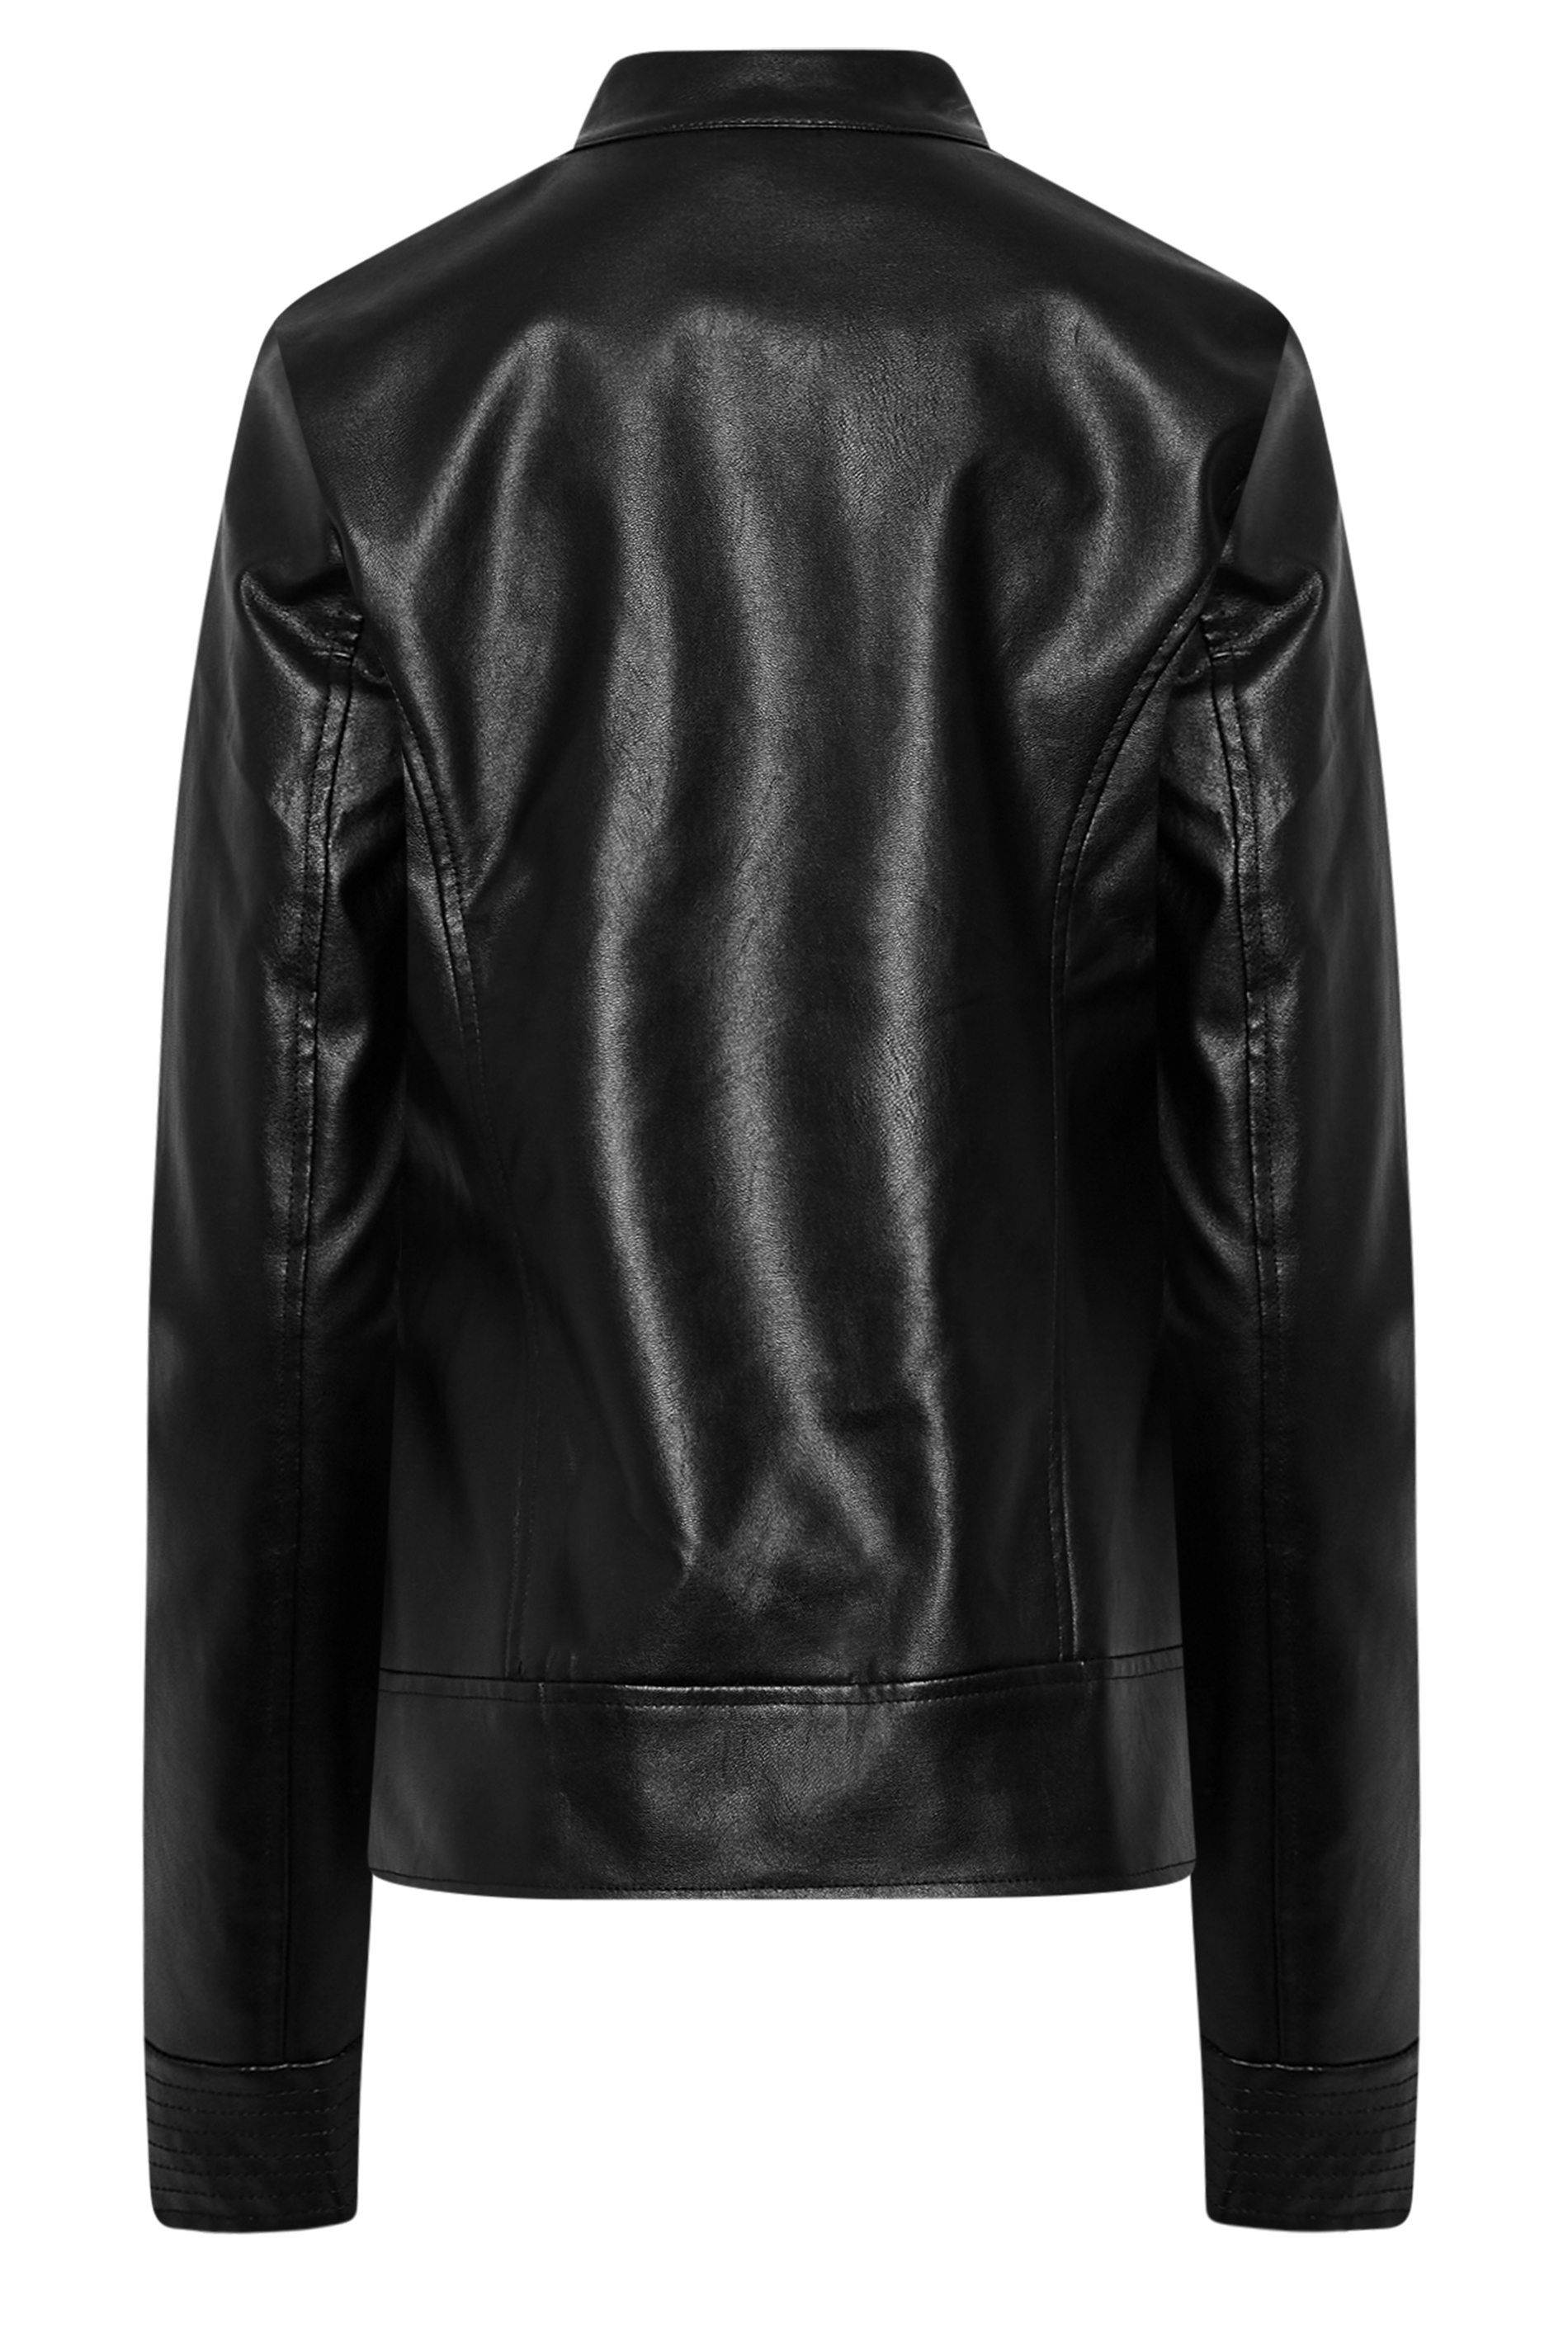 LTS Tall Black Women's Collarless Faux Leather Jacket | Long Tall Sally 3